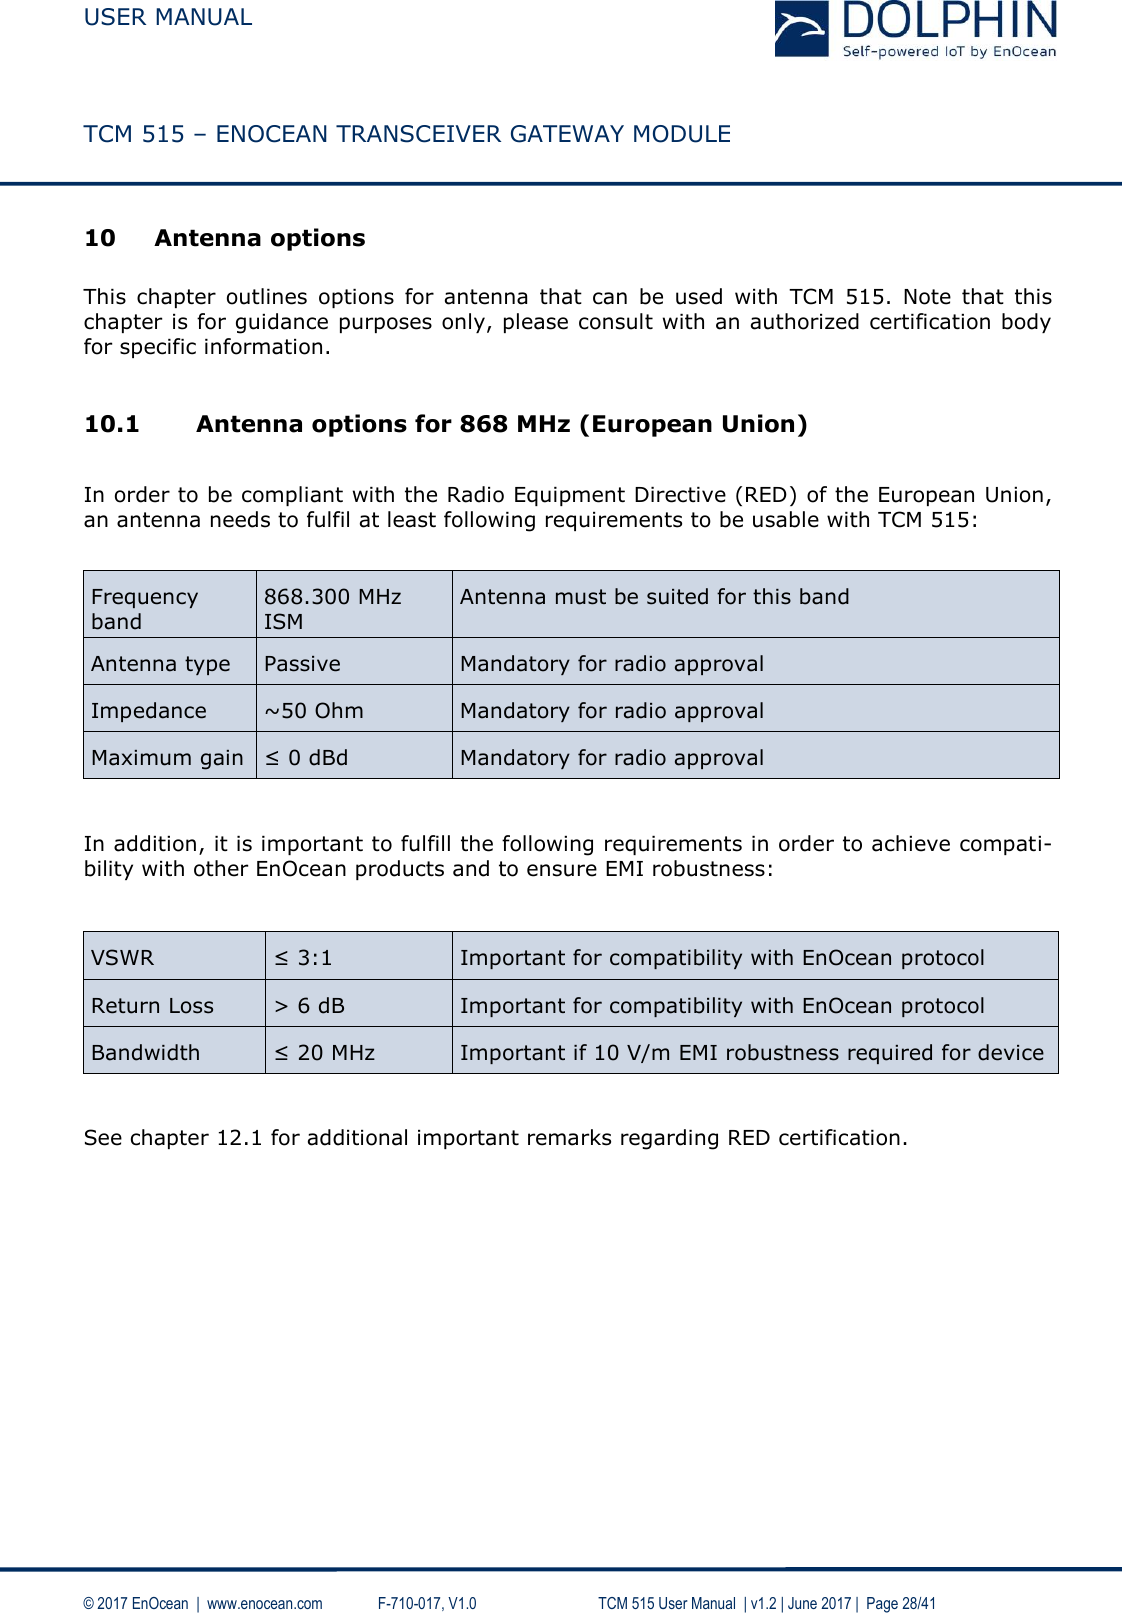  USER MANUAL    TCM 515 – ENOCEAN TRANSCEIVER GATEWAY MODULE  © 2017 EnOcean  |  www.enocean.com   F-710-017, V1.0        TCM 515 User Manual  | v1.2 | June 2017 |  Page 28/41  10 Antenna options   This  chapter  outlines  options  for  antenna  that  can  be  used  with  TCM  515.  Note  that  this chapter is for guidance purposes only, please consult with an authorized certification body for specific information.  10.1 Antenna options for 868 MHz (European Union)  In order to be compliant with the Radio Equipment Directive (RED) of the European Union, an antenna needs to fulfil at least following requirements to be usable with TCM 515:  Frequency band 868.300 MHz ISM Antenna must be suited for this band Antenna type Passive Mandatory for radio approval Impedance ~50 Ohm Mandatory for radio approval Maximum gain ≤ 0 dBd Mandatory for radio approval   In addition, it is important to fulfill the following requirements in order to achieve compati-bility with other EnOcean products and to ensure EMI robustness:   VSWR ≤ 3:1 Important for compatibility with EnOcean protocol Return Loss &gt; 6 dB Important for compatibility with EnOcean protocol Bandwidth  ≤ 20 MHz Important if 10 V/m EMI robustness required for device   See chapter 12.1 for additional important remarks regarding RED certification.    